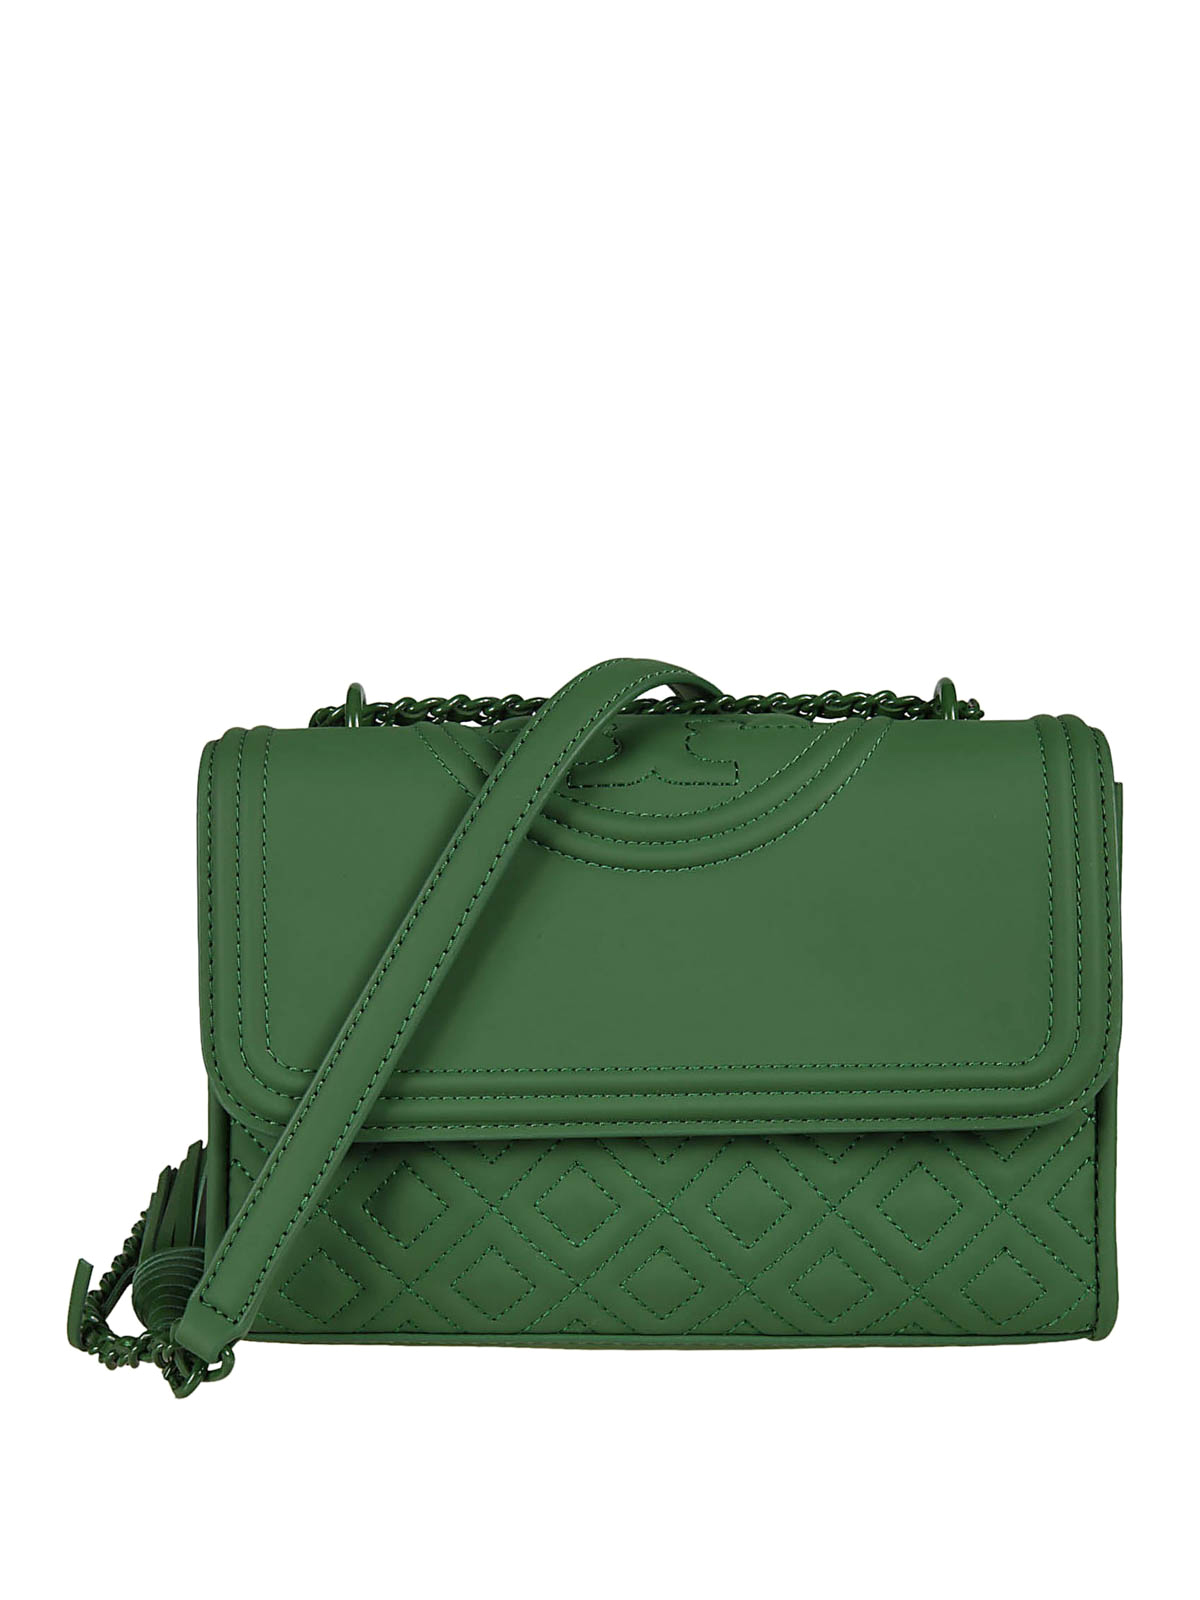 Tory Burch Green Leather Fleming Convertible Shoulder Bag Tory